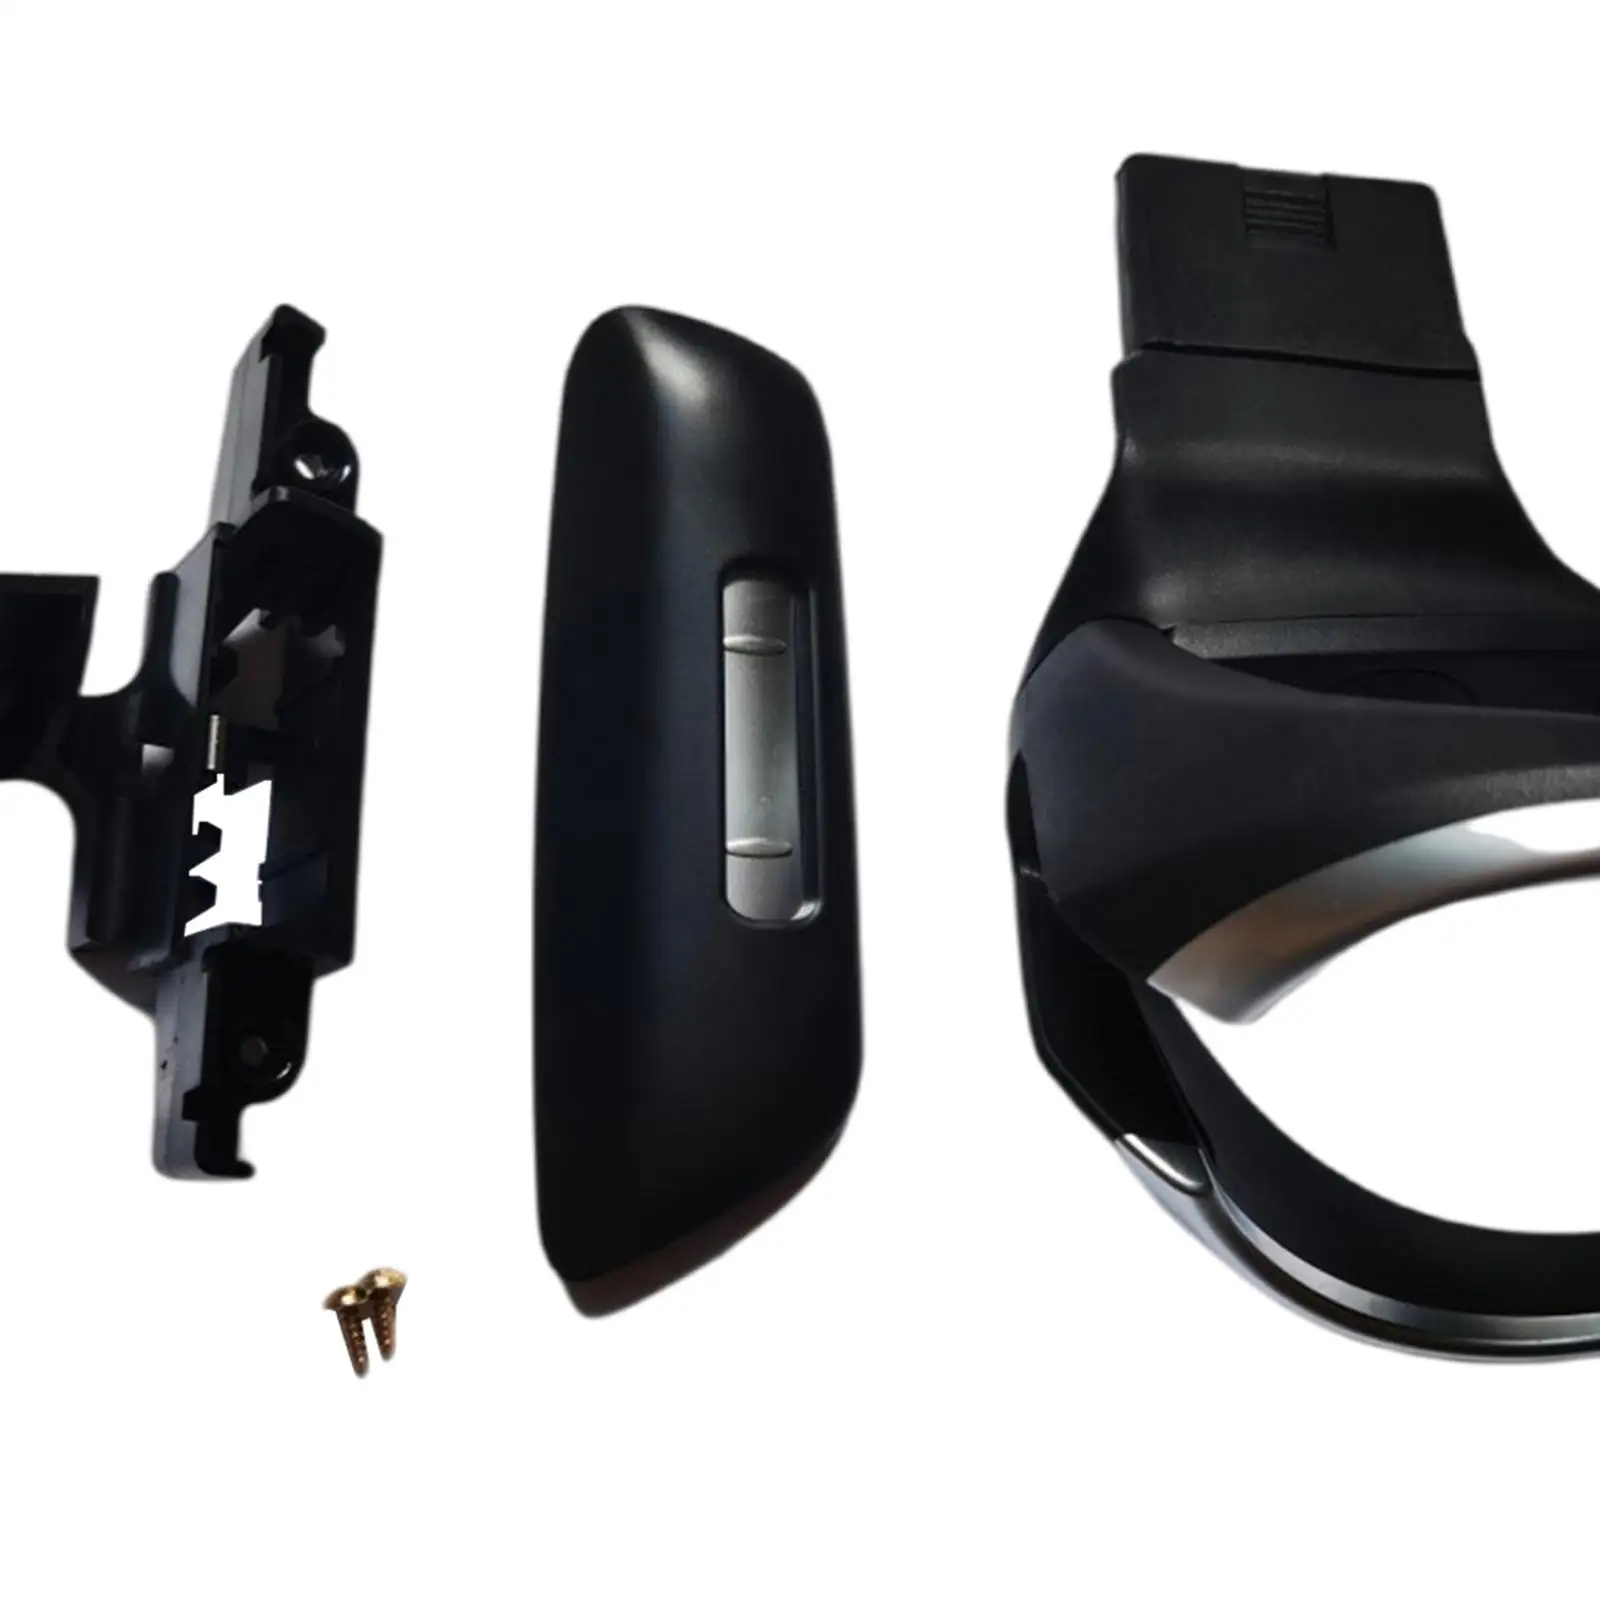 Cup Holder 51160443082 with Base and Cover Organizer for bmw